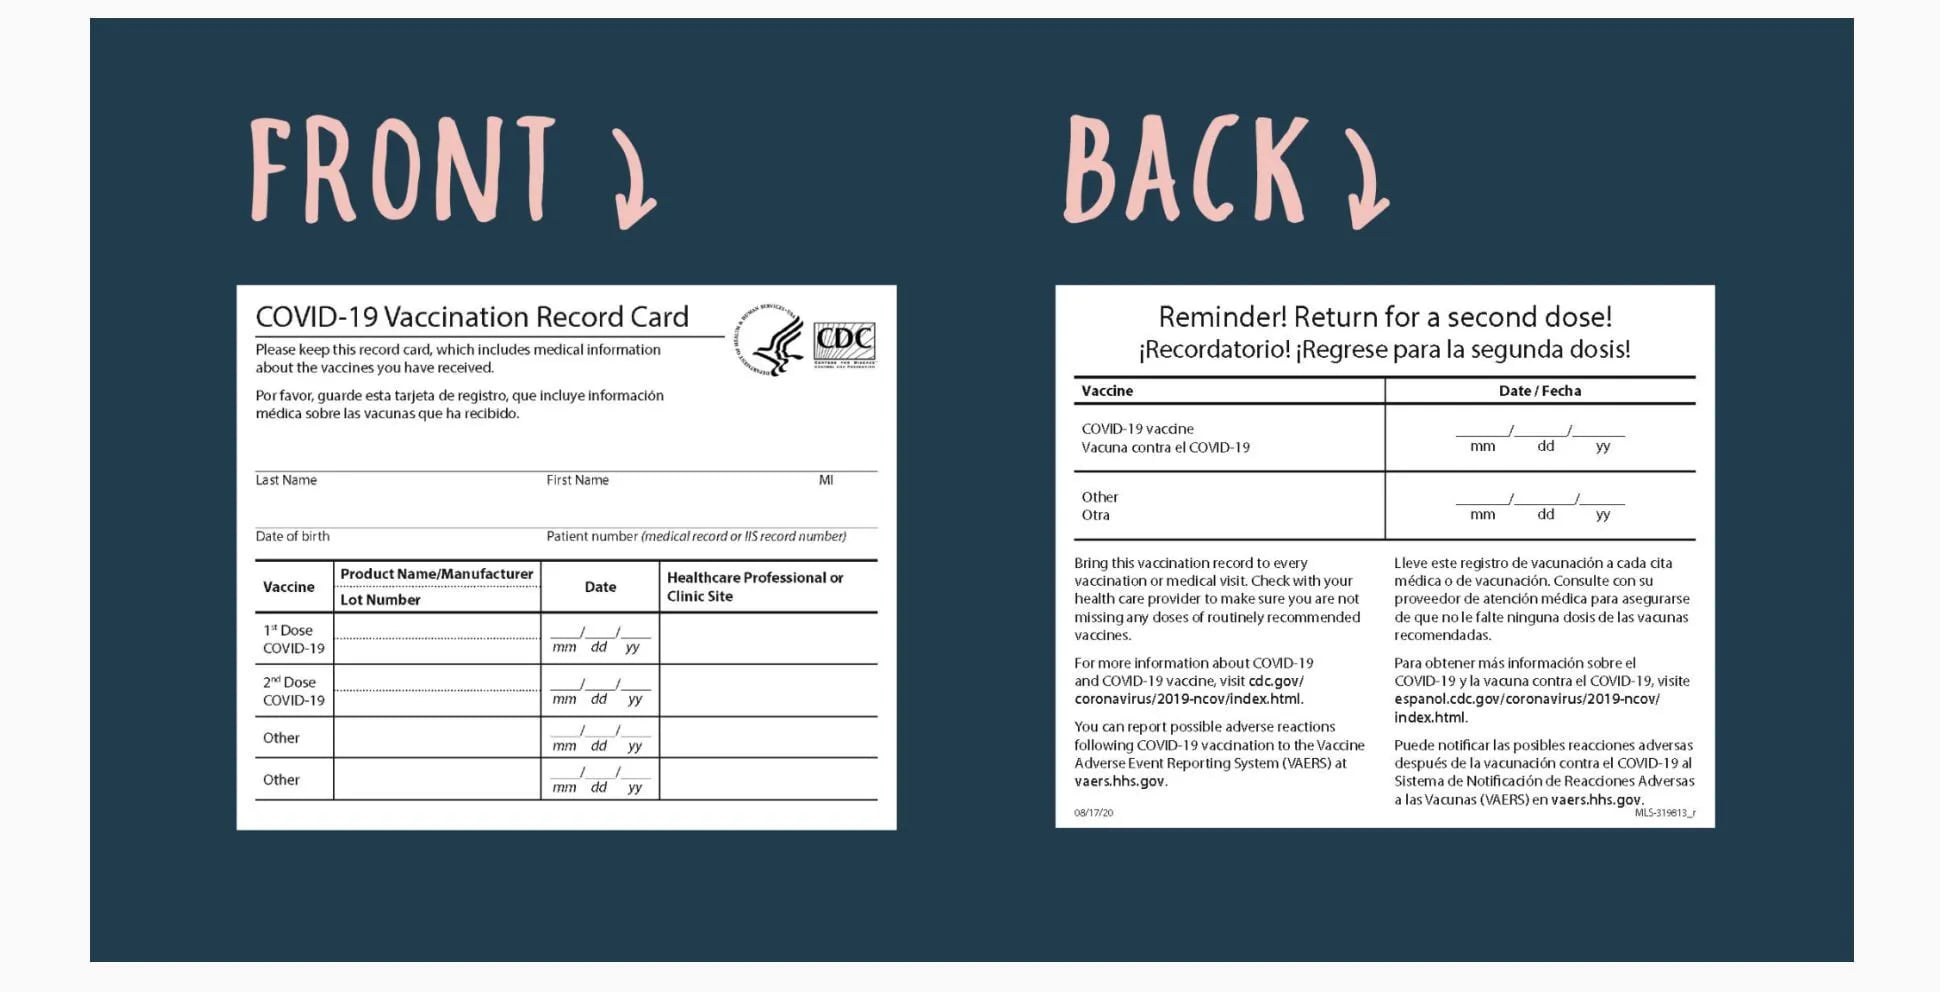 Don't share your COVID-19 vaccination card on social media. Here's